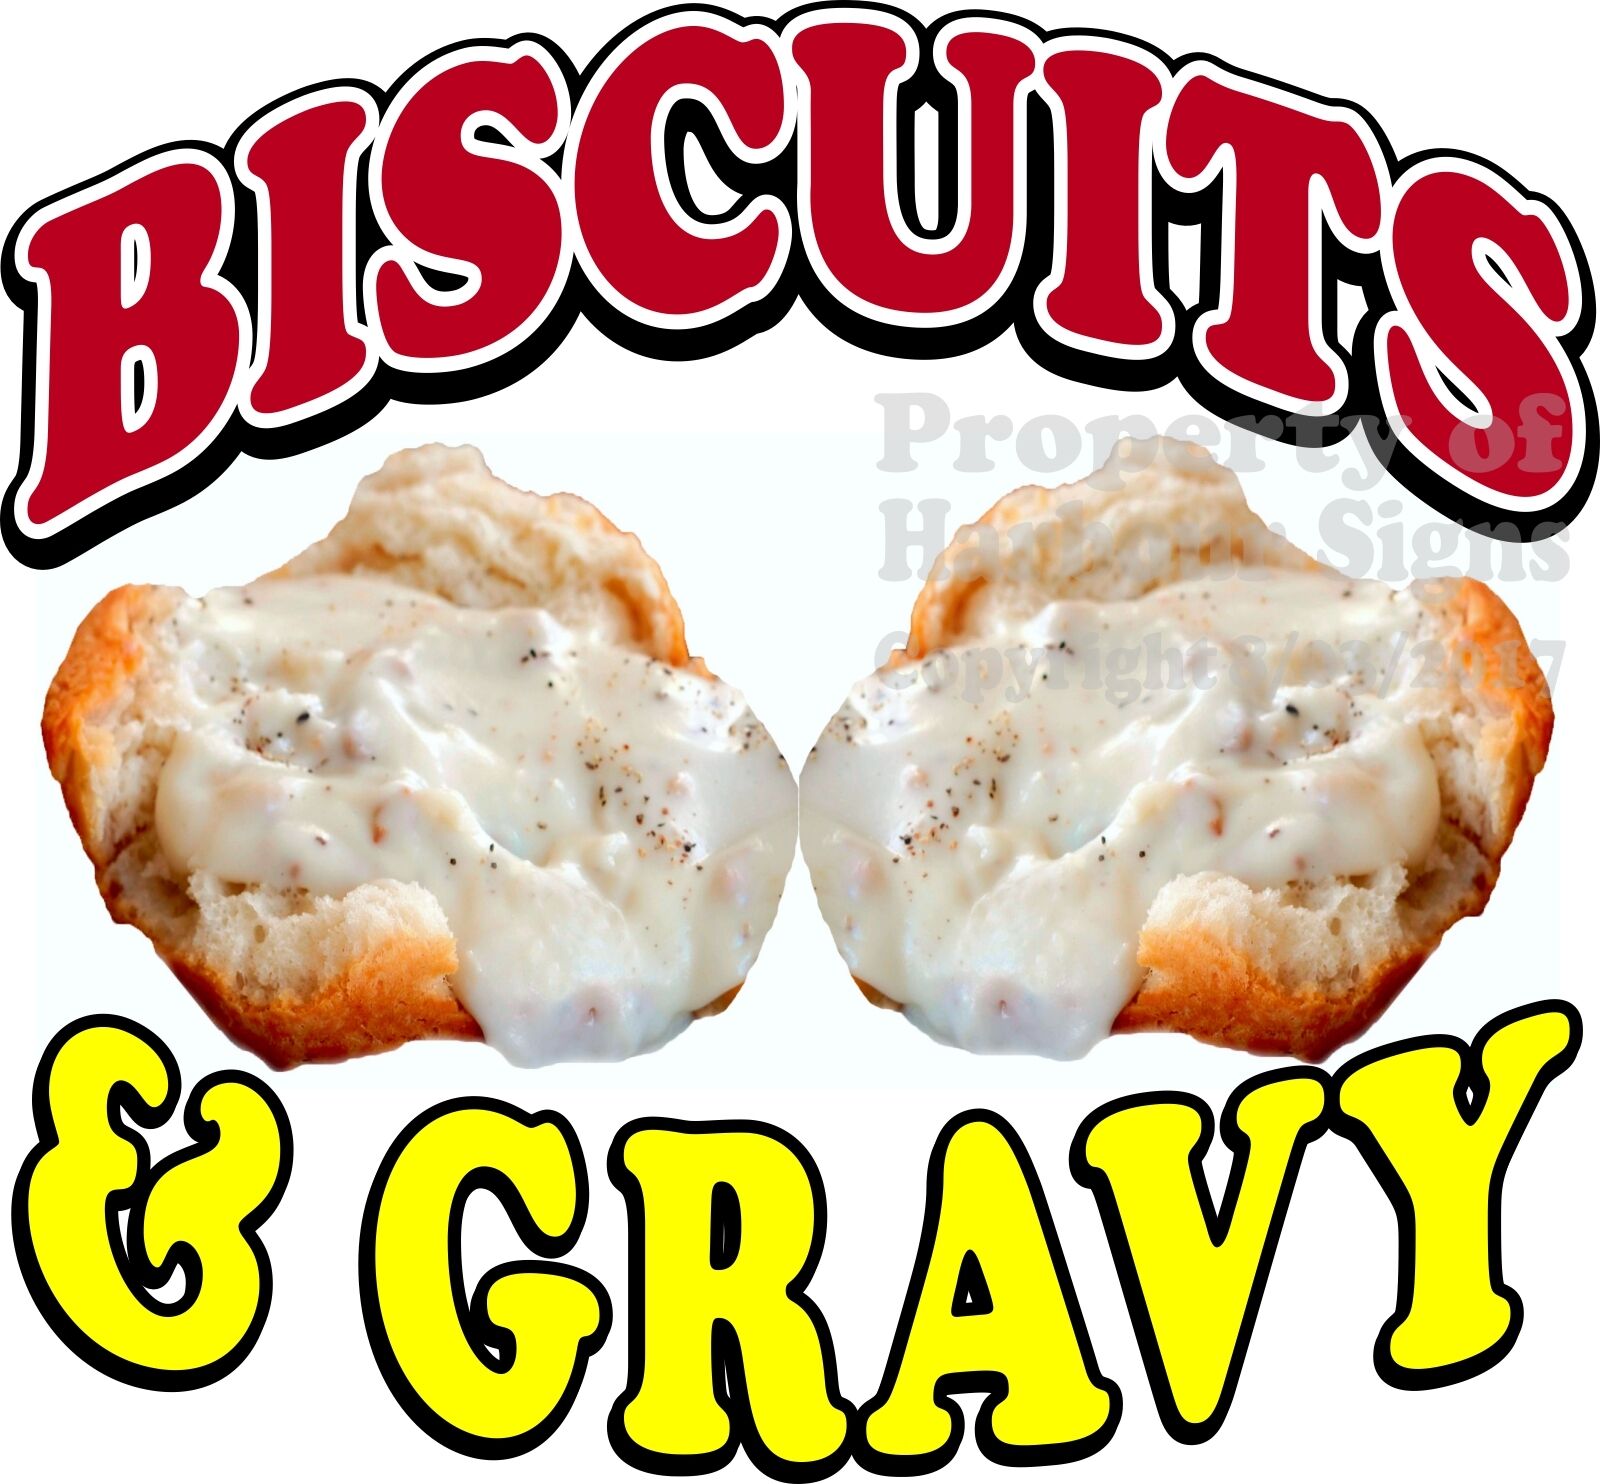 Biscuits & Gravy DECAL (CHOOSE YOUR SIZE) Food Truck Concession Sticker Populaire acties